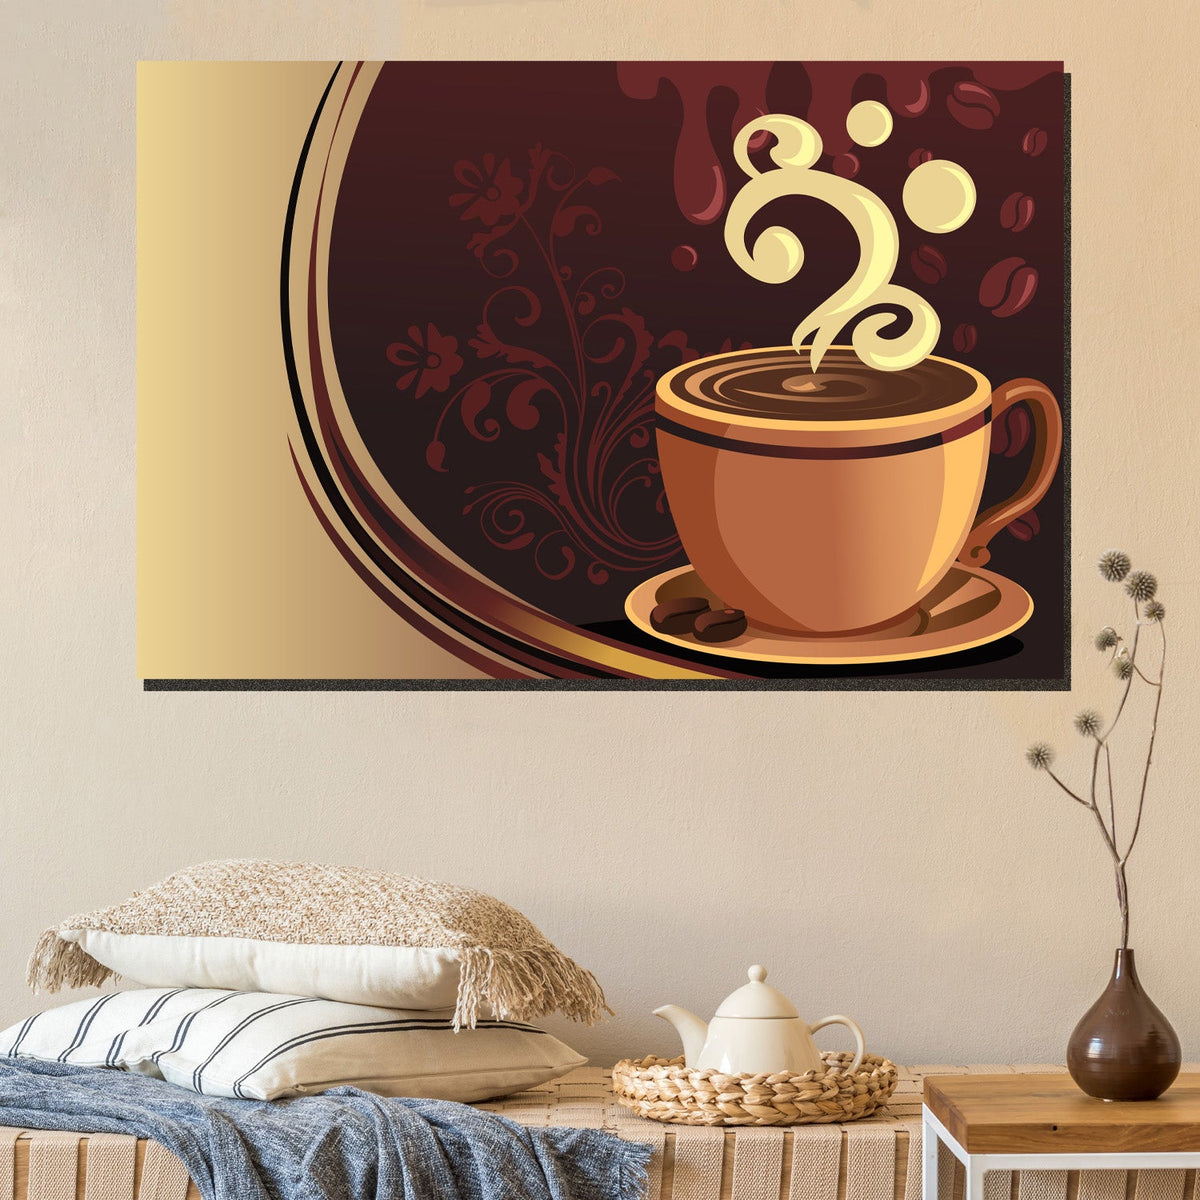 https://cdn.shopify.com/s/files/1/0387/9986/8044/products/CoffeeCupPosterCanvasArtprintStretched-1.jpg